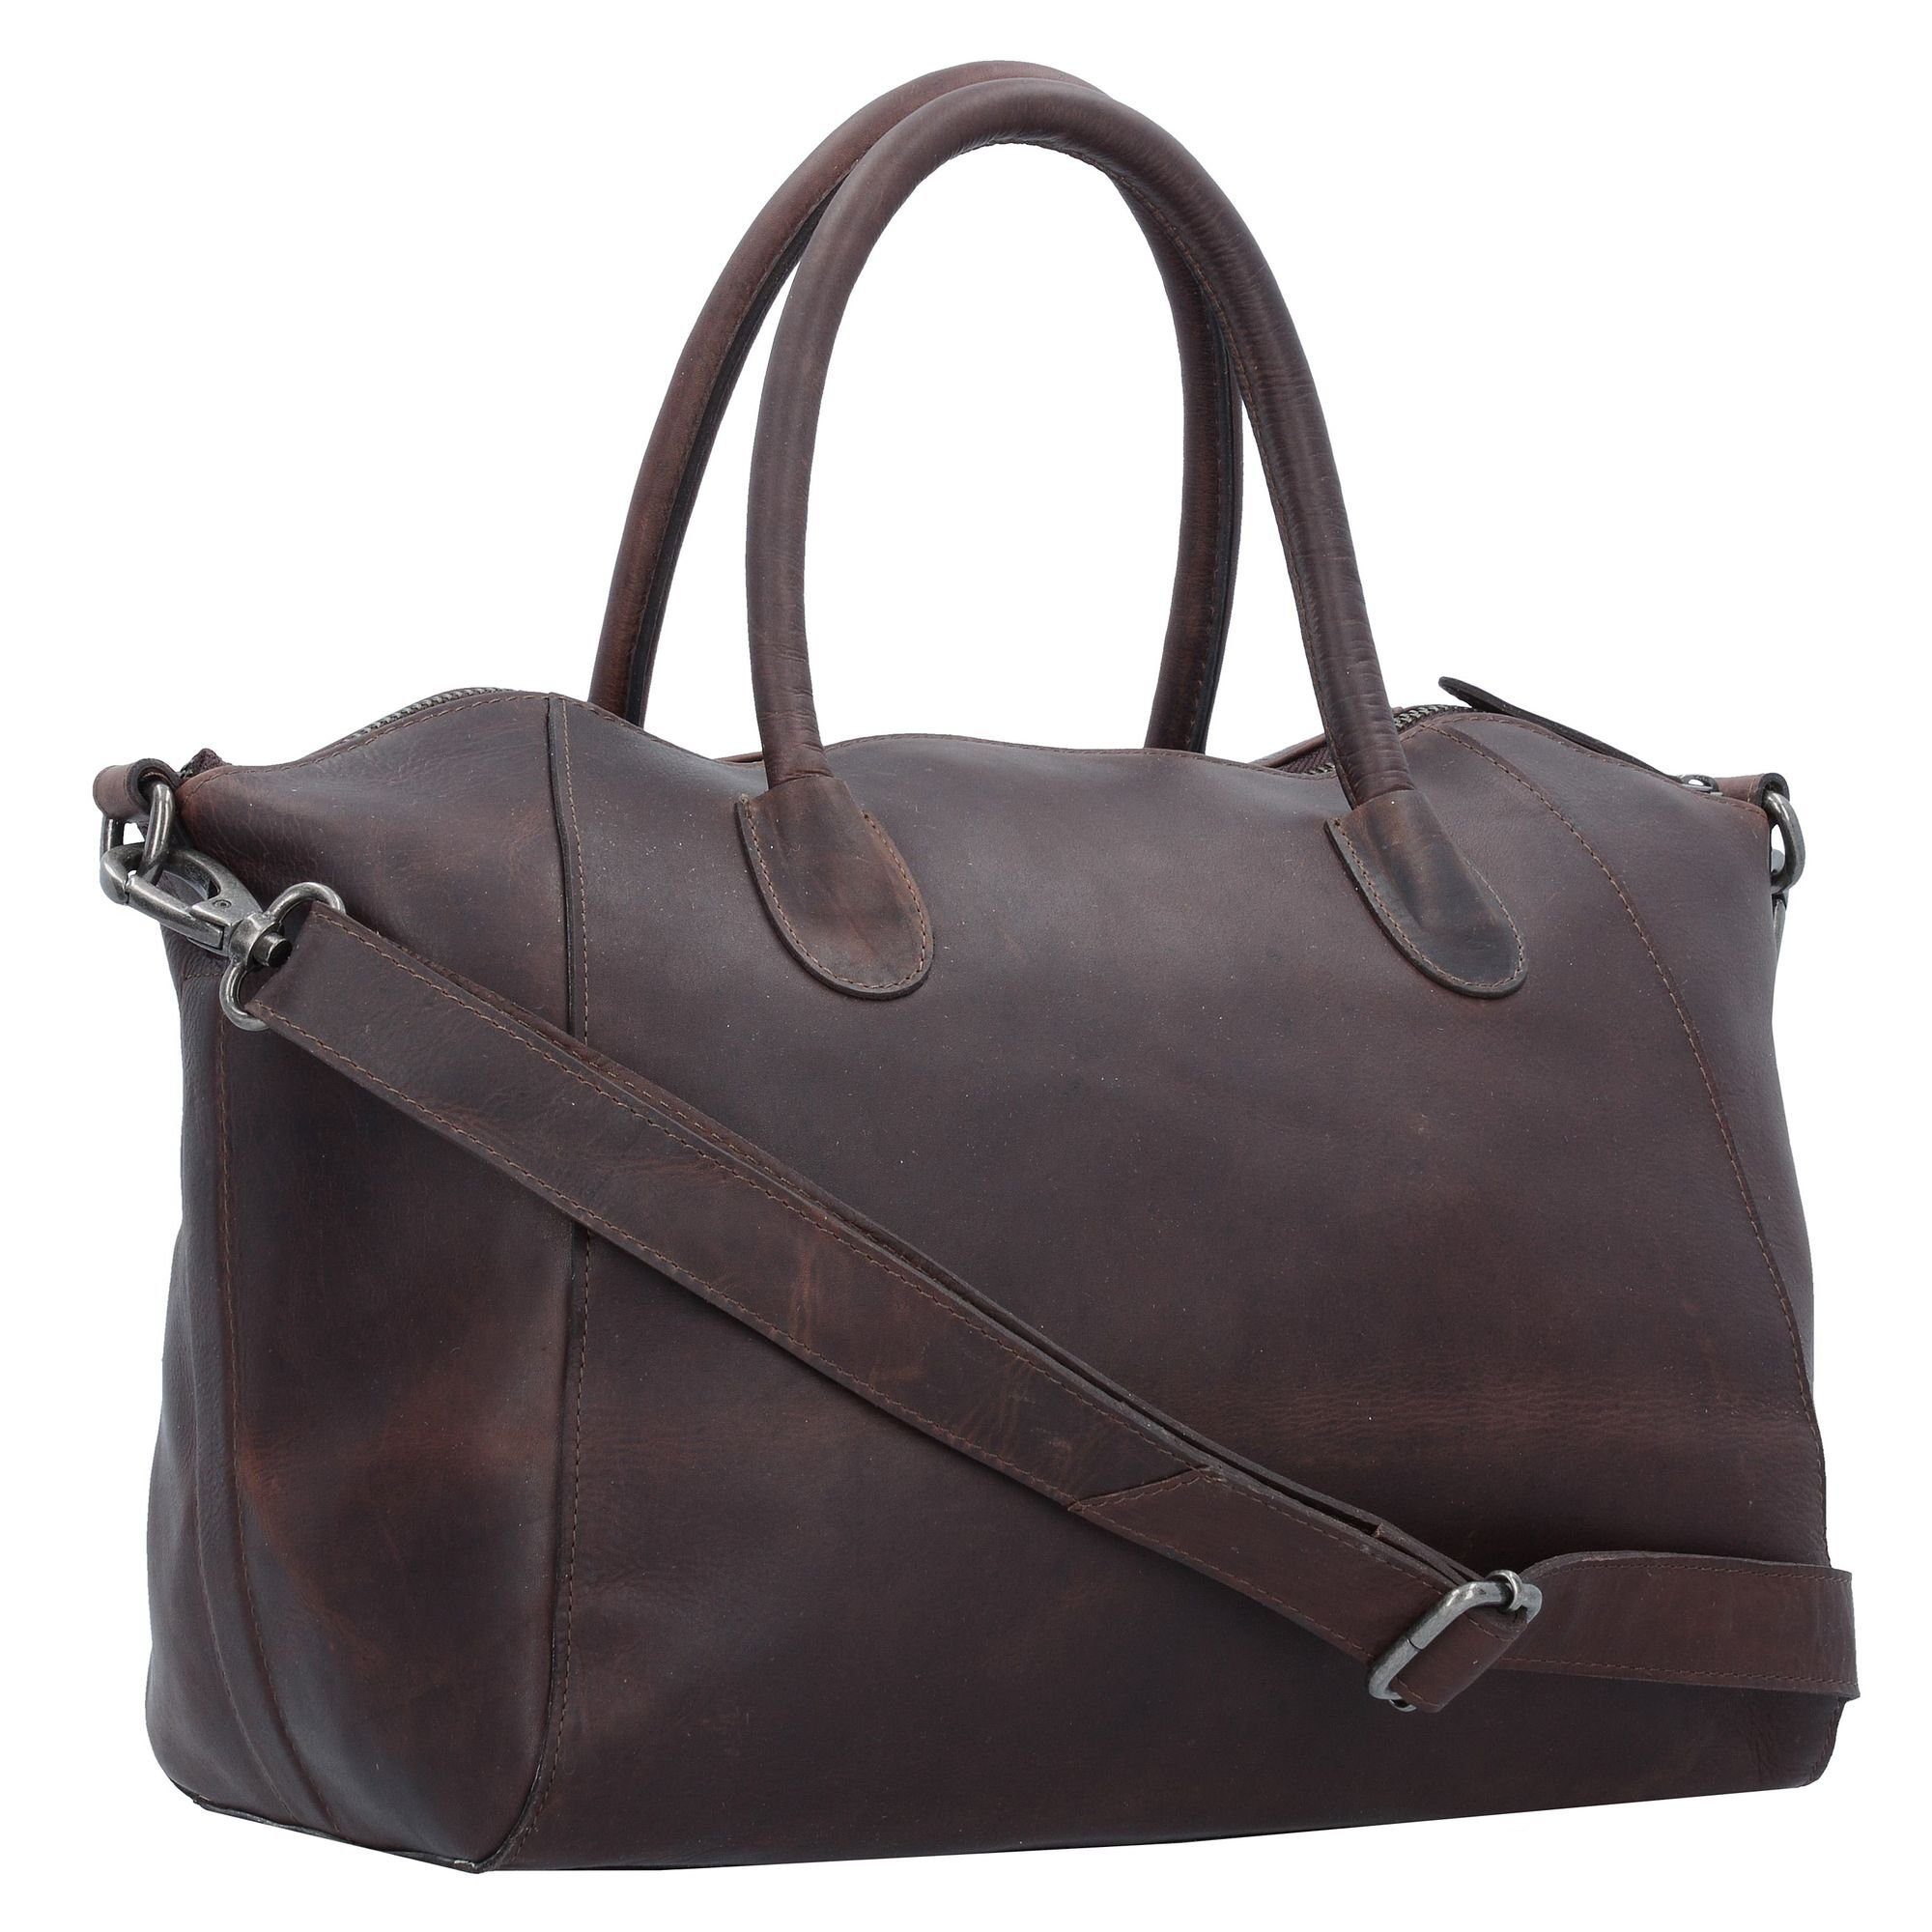 The brown Wax Pull Chesterfield Schultertasche Brand Leder Up,